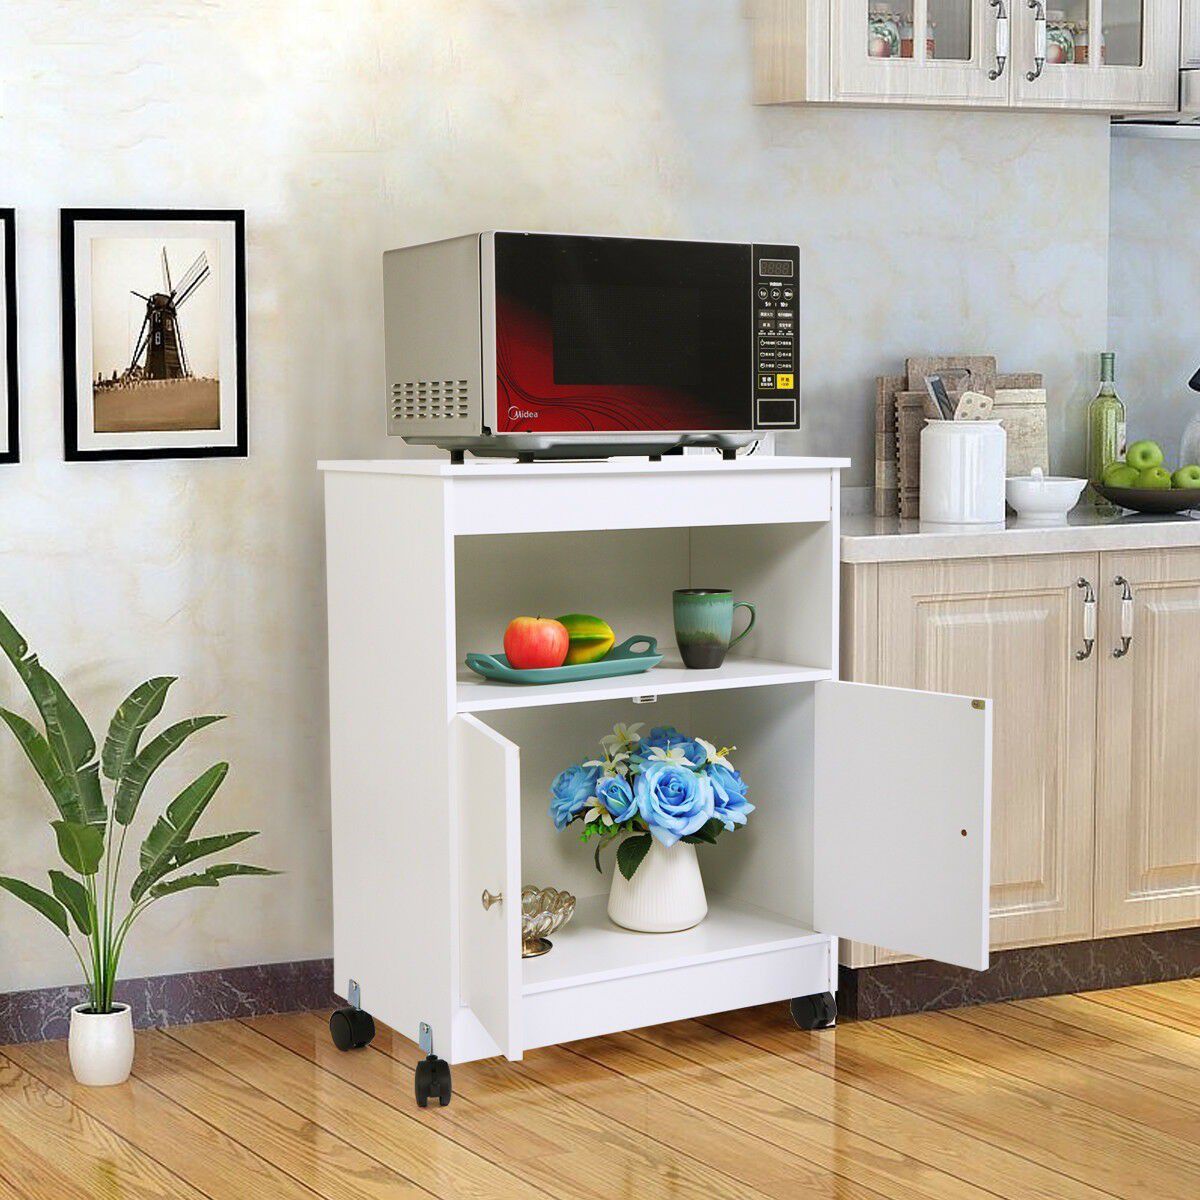 Lowestbest Kitchen Cabinet for Home, Wooden Rolling Kitchen Cart, White Kitchen Carts and Islands, Modern Large Open Shelf Cabinet Microwave